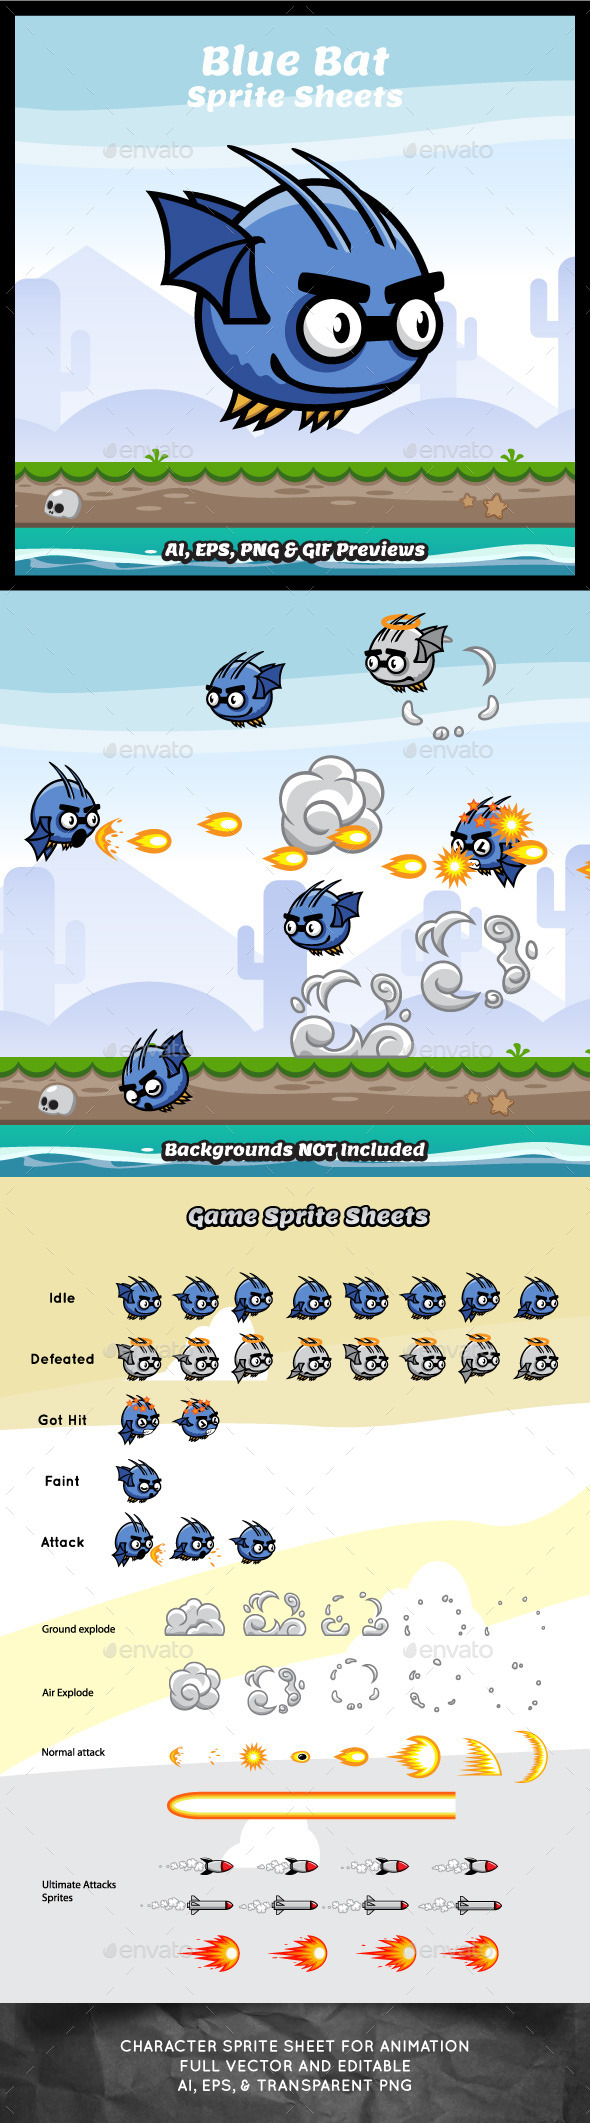 Blue Bat Game Character Sprite Sheets